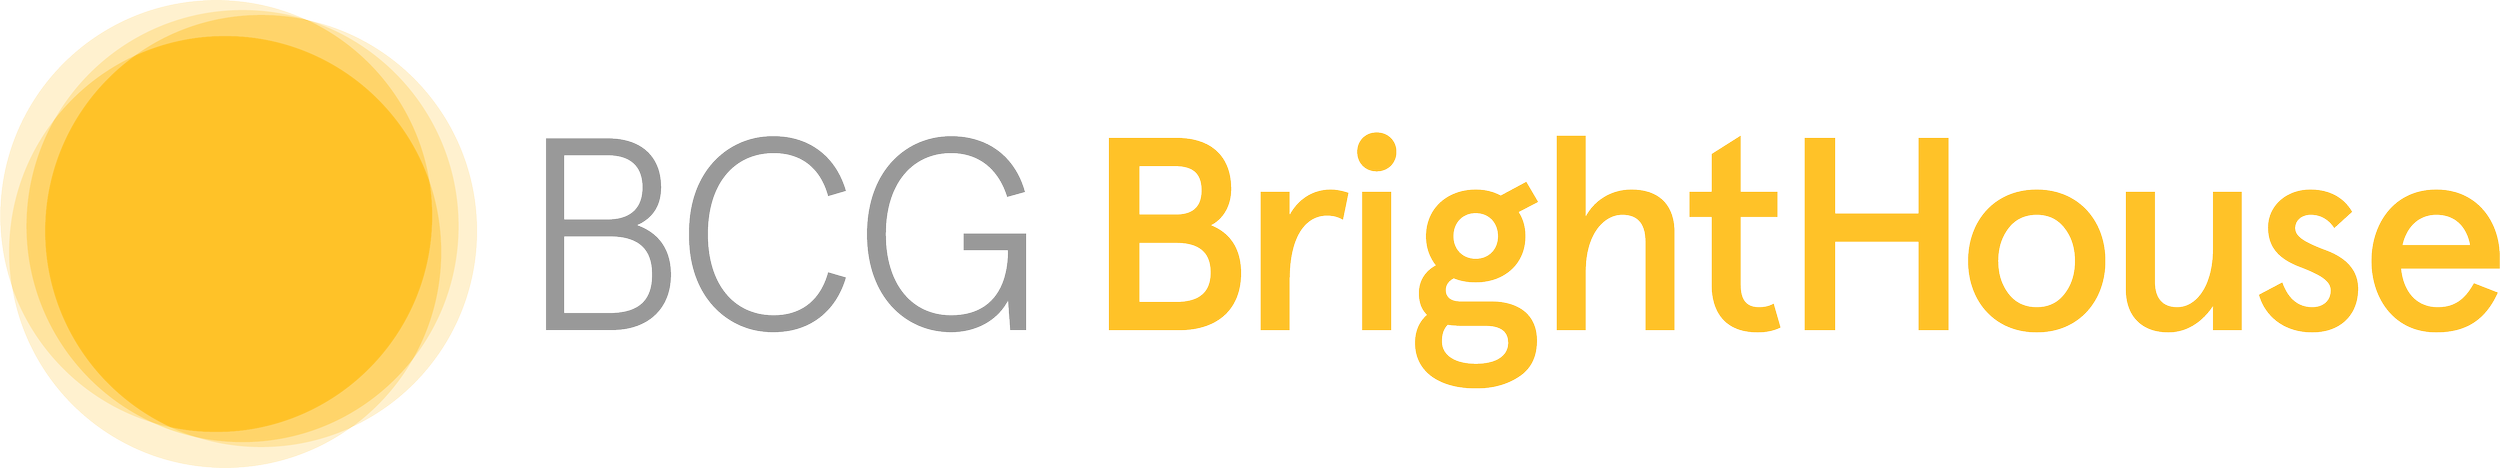 logo-BCGbrighthouse